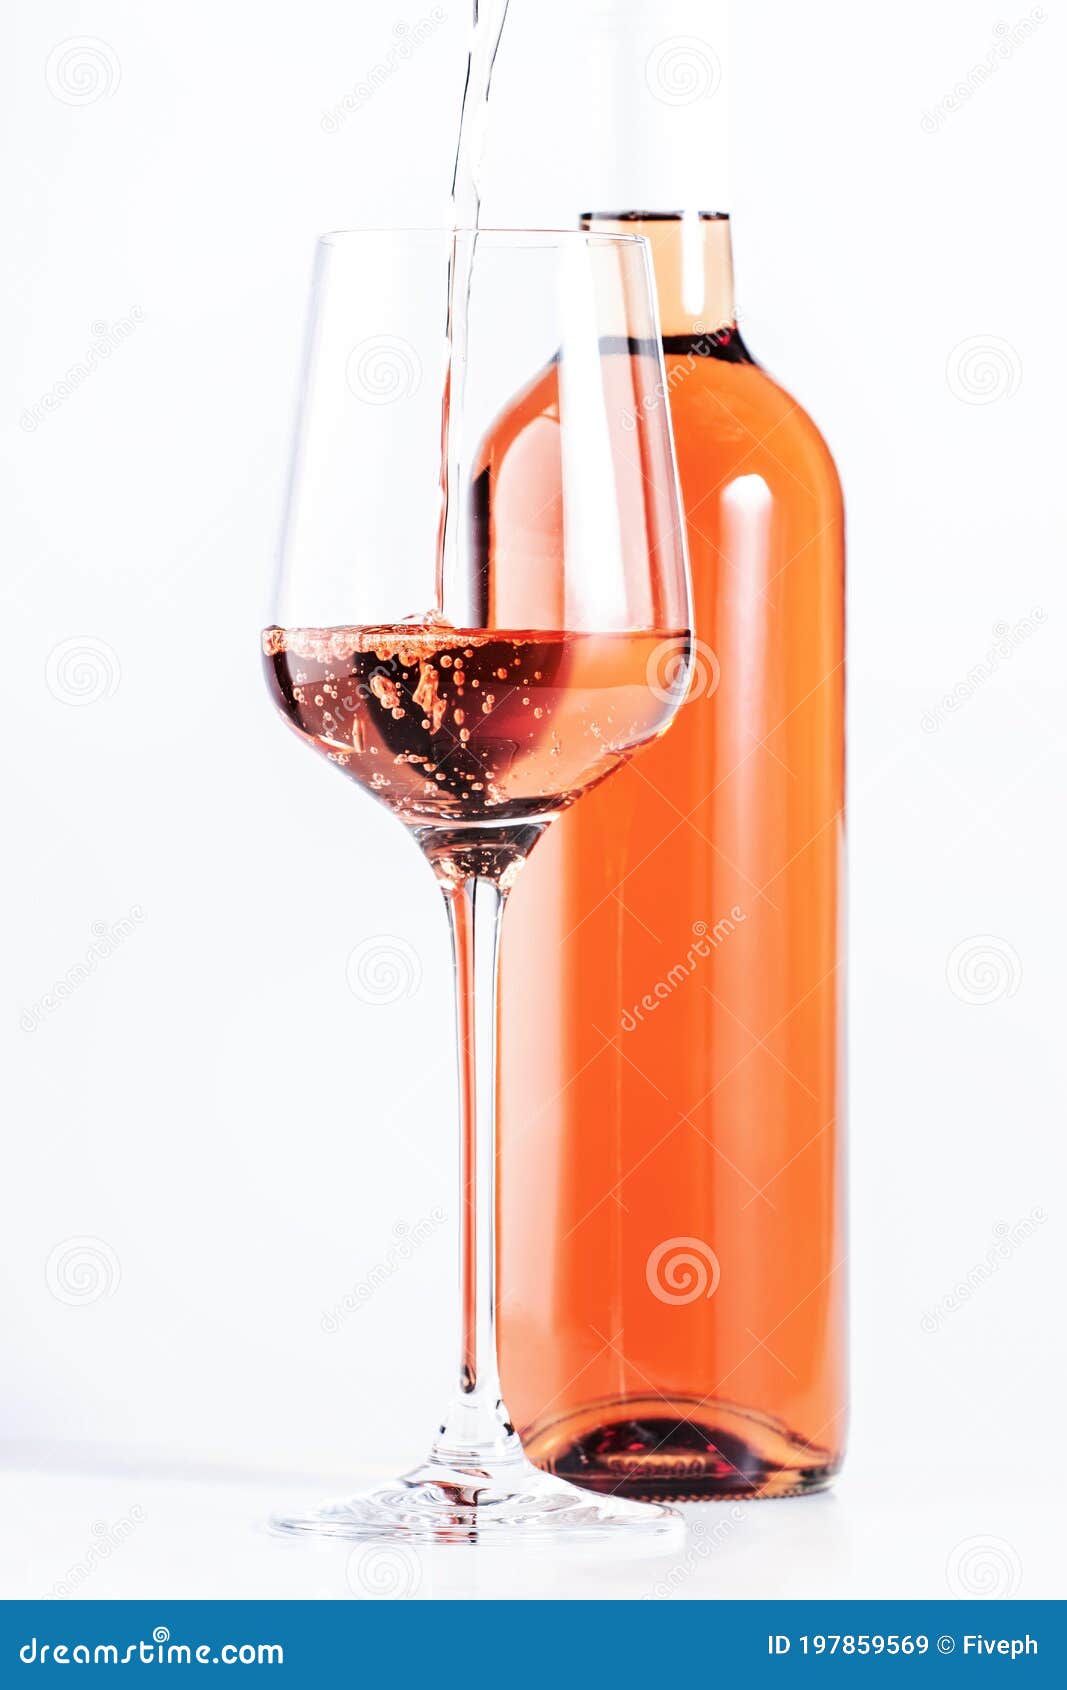 rose wine pouring out of the bottle, white background. rosado, rosato or blush wine tasting in wineshop, bar concept. copy space